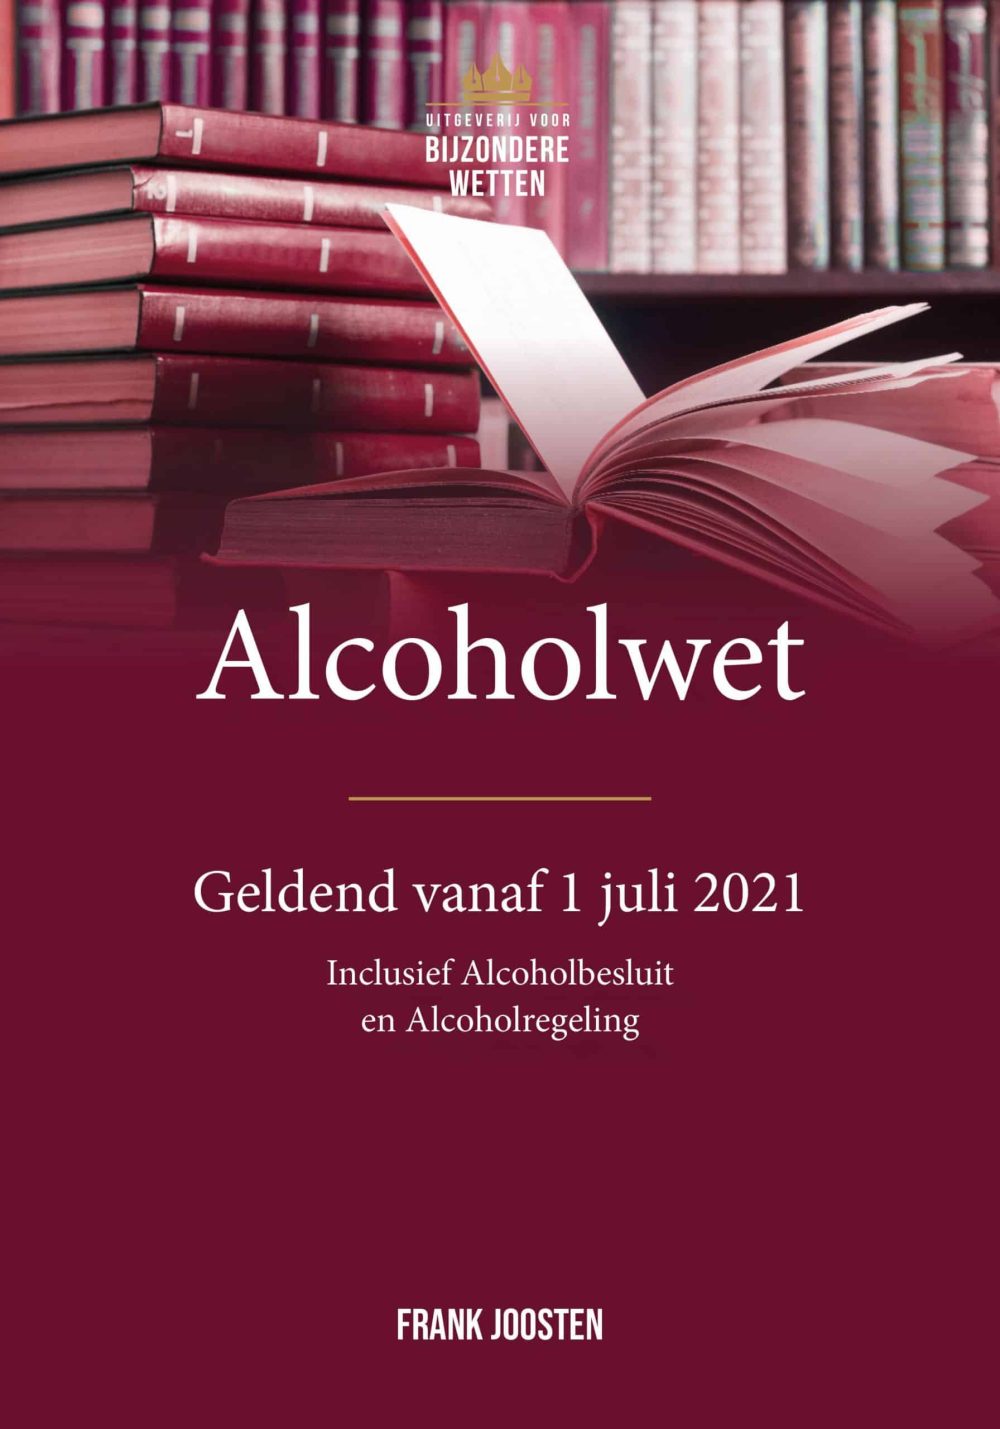 Alcoholwet 2021